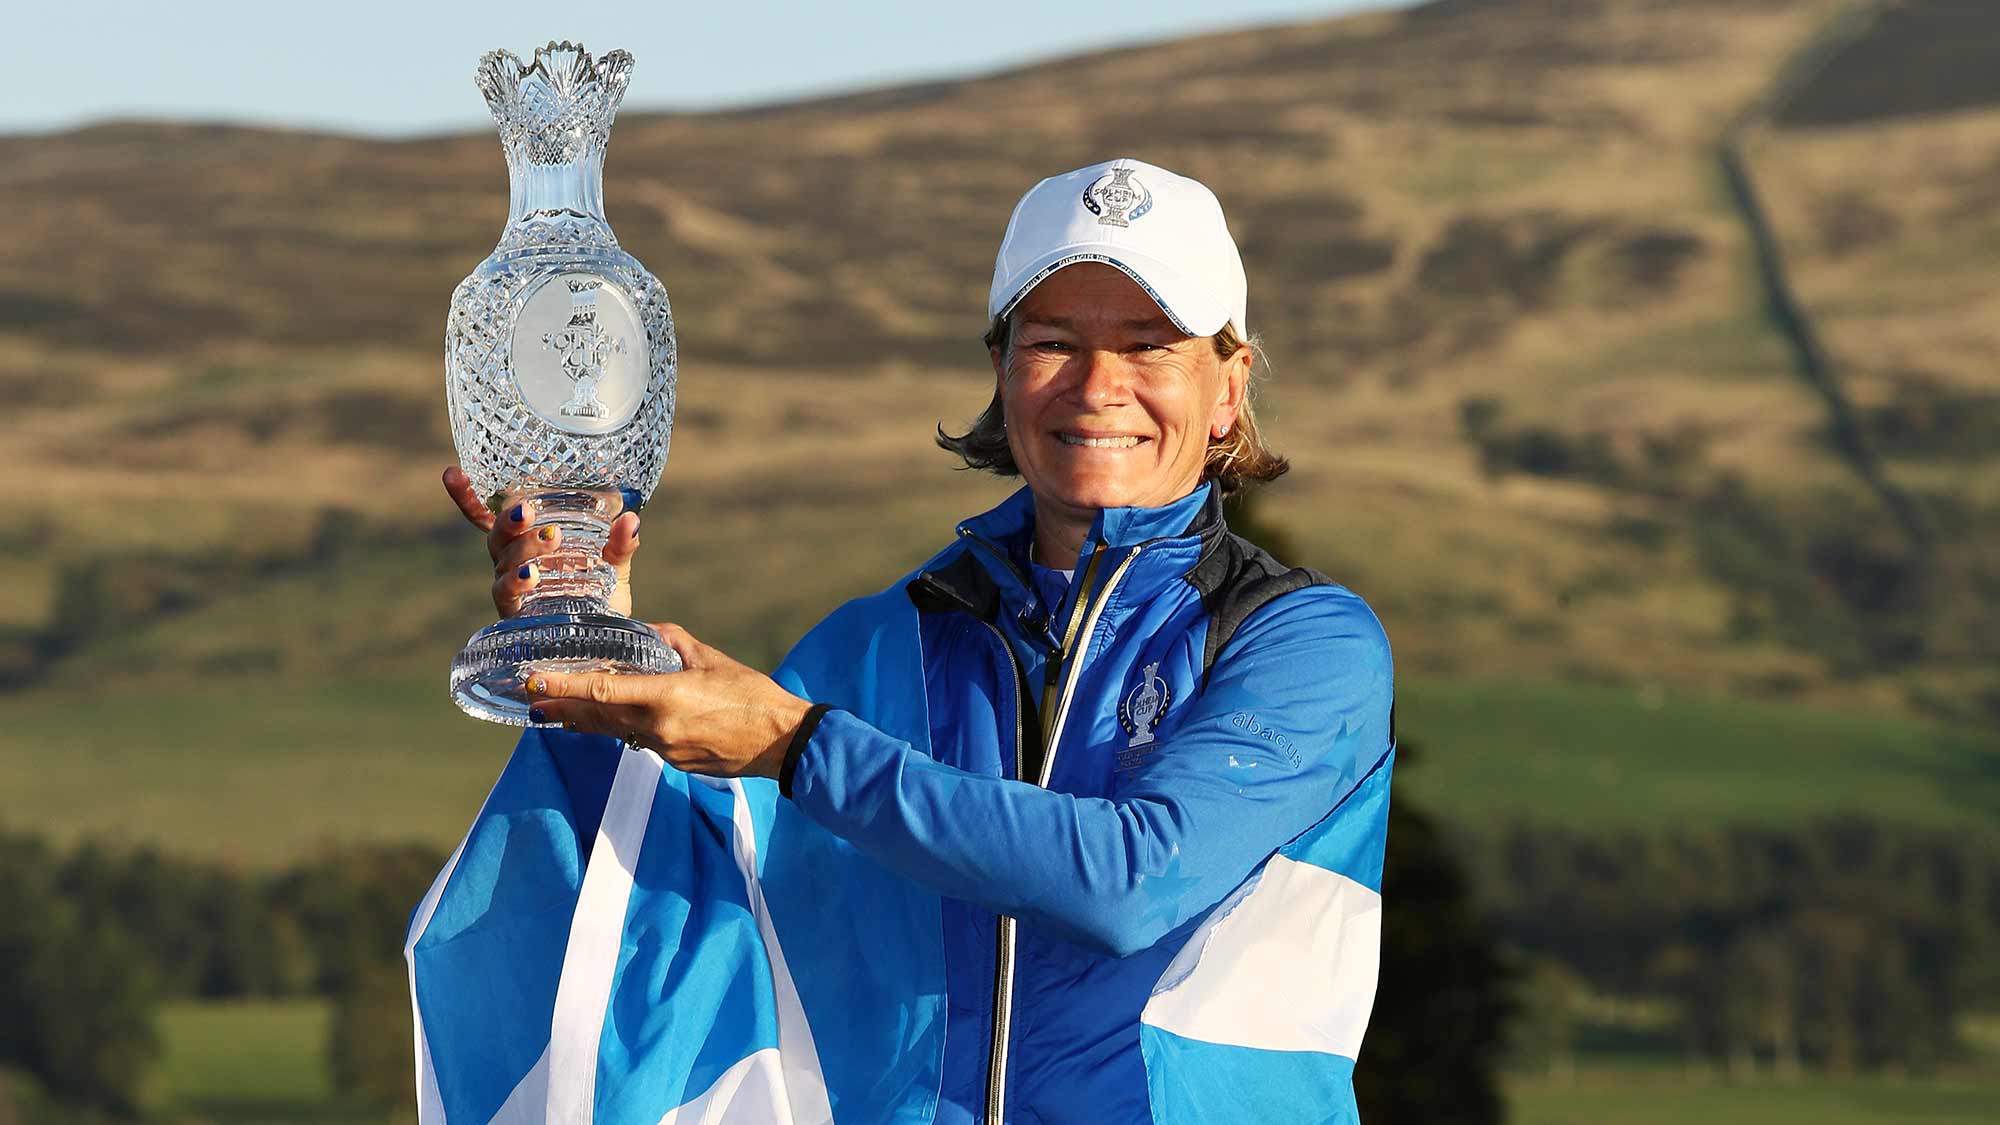 Team Europe captain Catriona Matthew celebrates her teams win with the Solheim Cup during the final day singles matches of the Solheim Cup at Gleneagles on September 15, 2019 in Auchterarder, Scotland